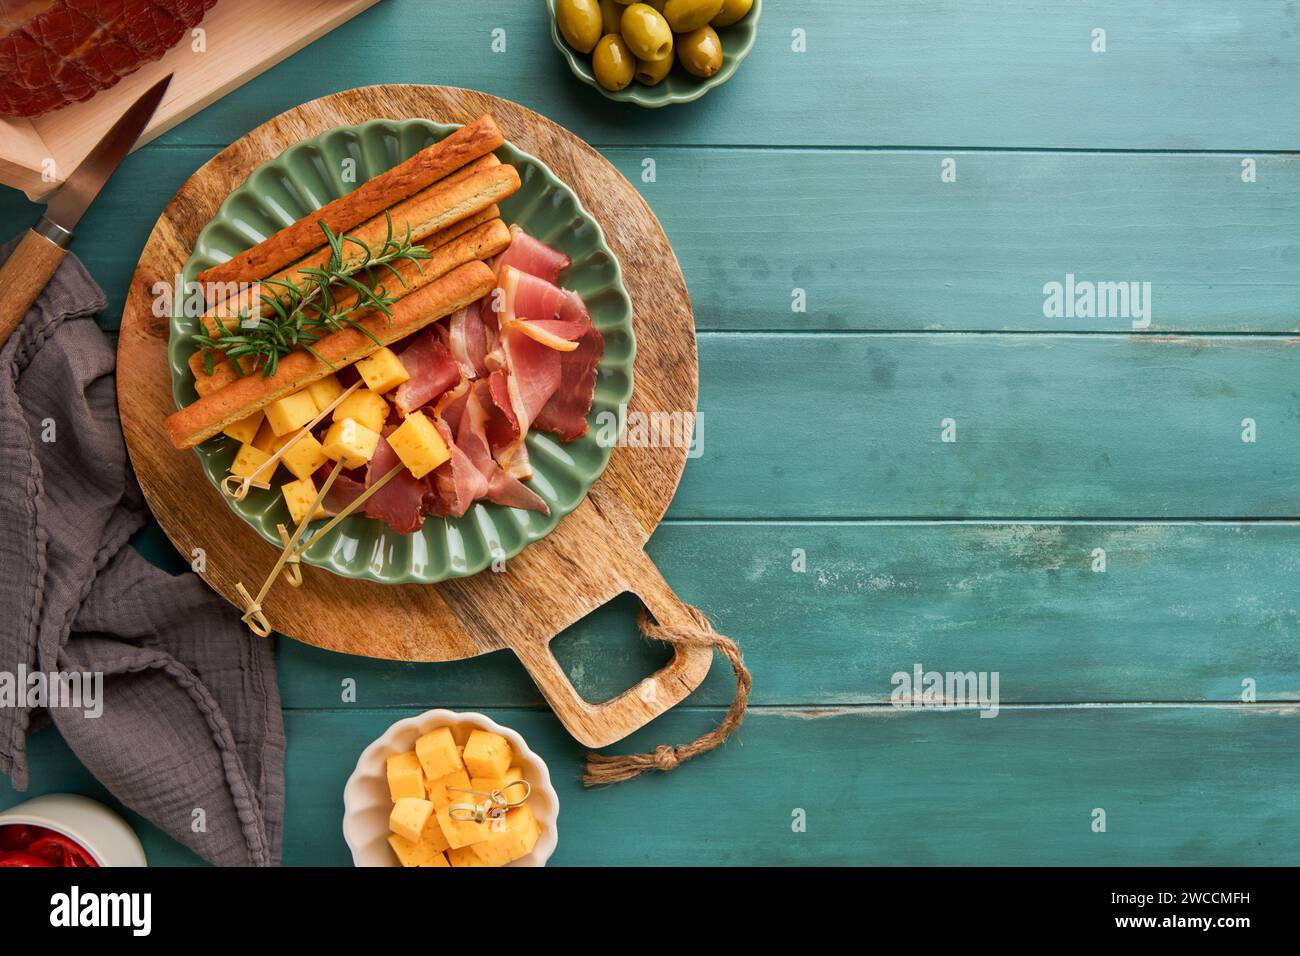 Slices of prosciutto or jamon. Antipasto Delicious grissini sticks with prosciutto, cheese, rosemary, olives on green plate on old wooden blue backgro Stock Photo